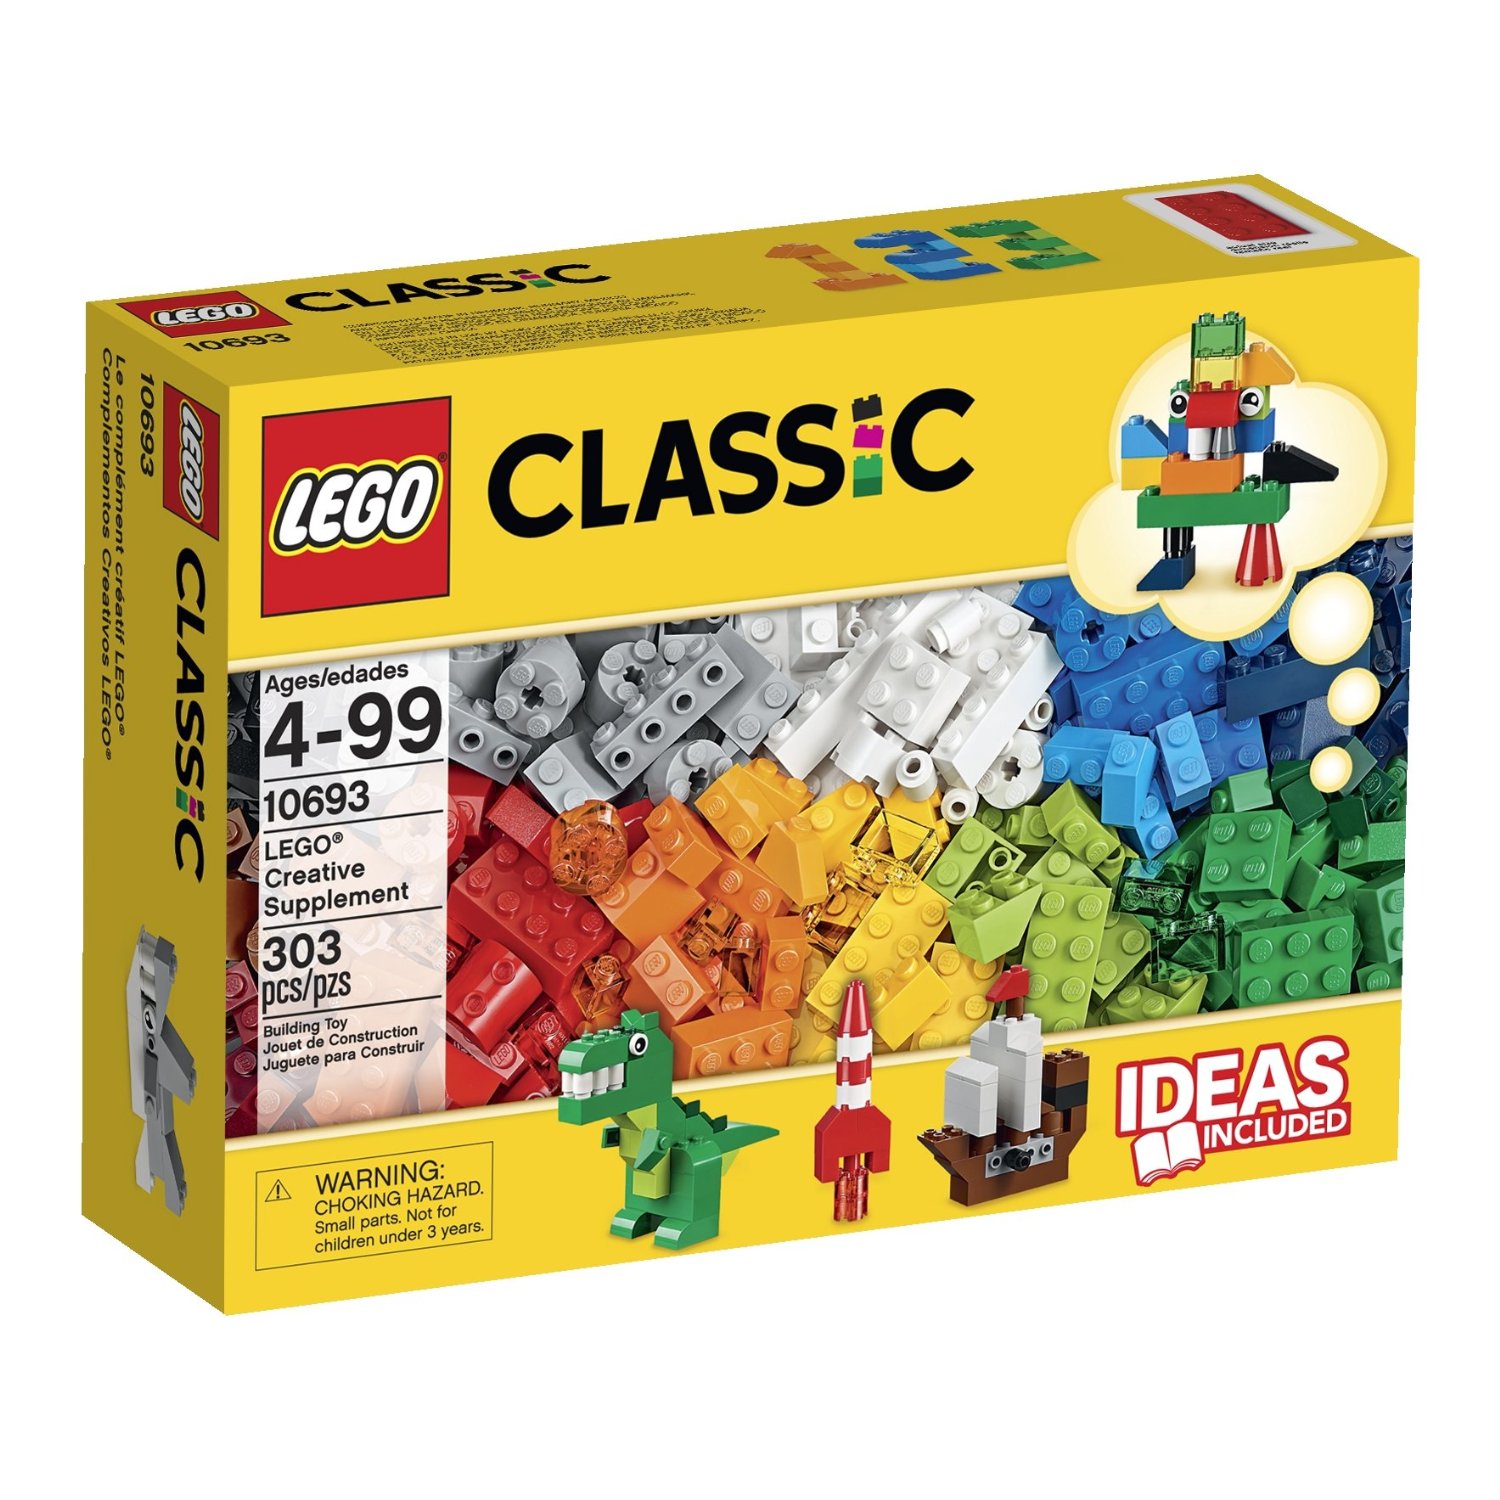 LEGO Classic Creative Supplement 10693 – Only $14.75!